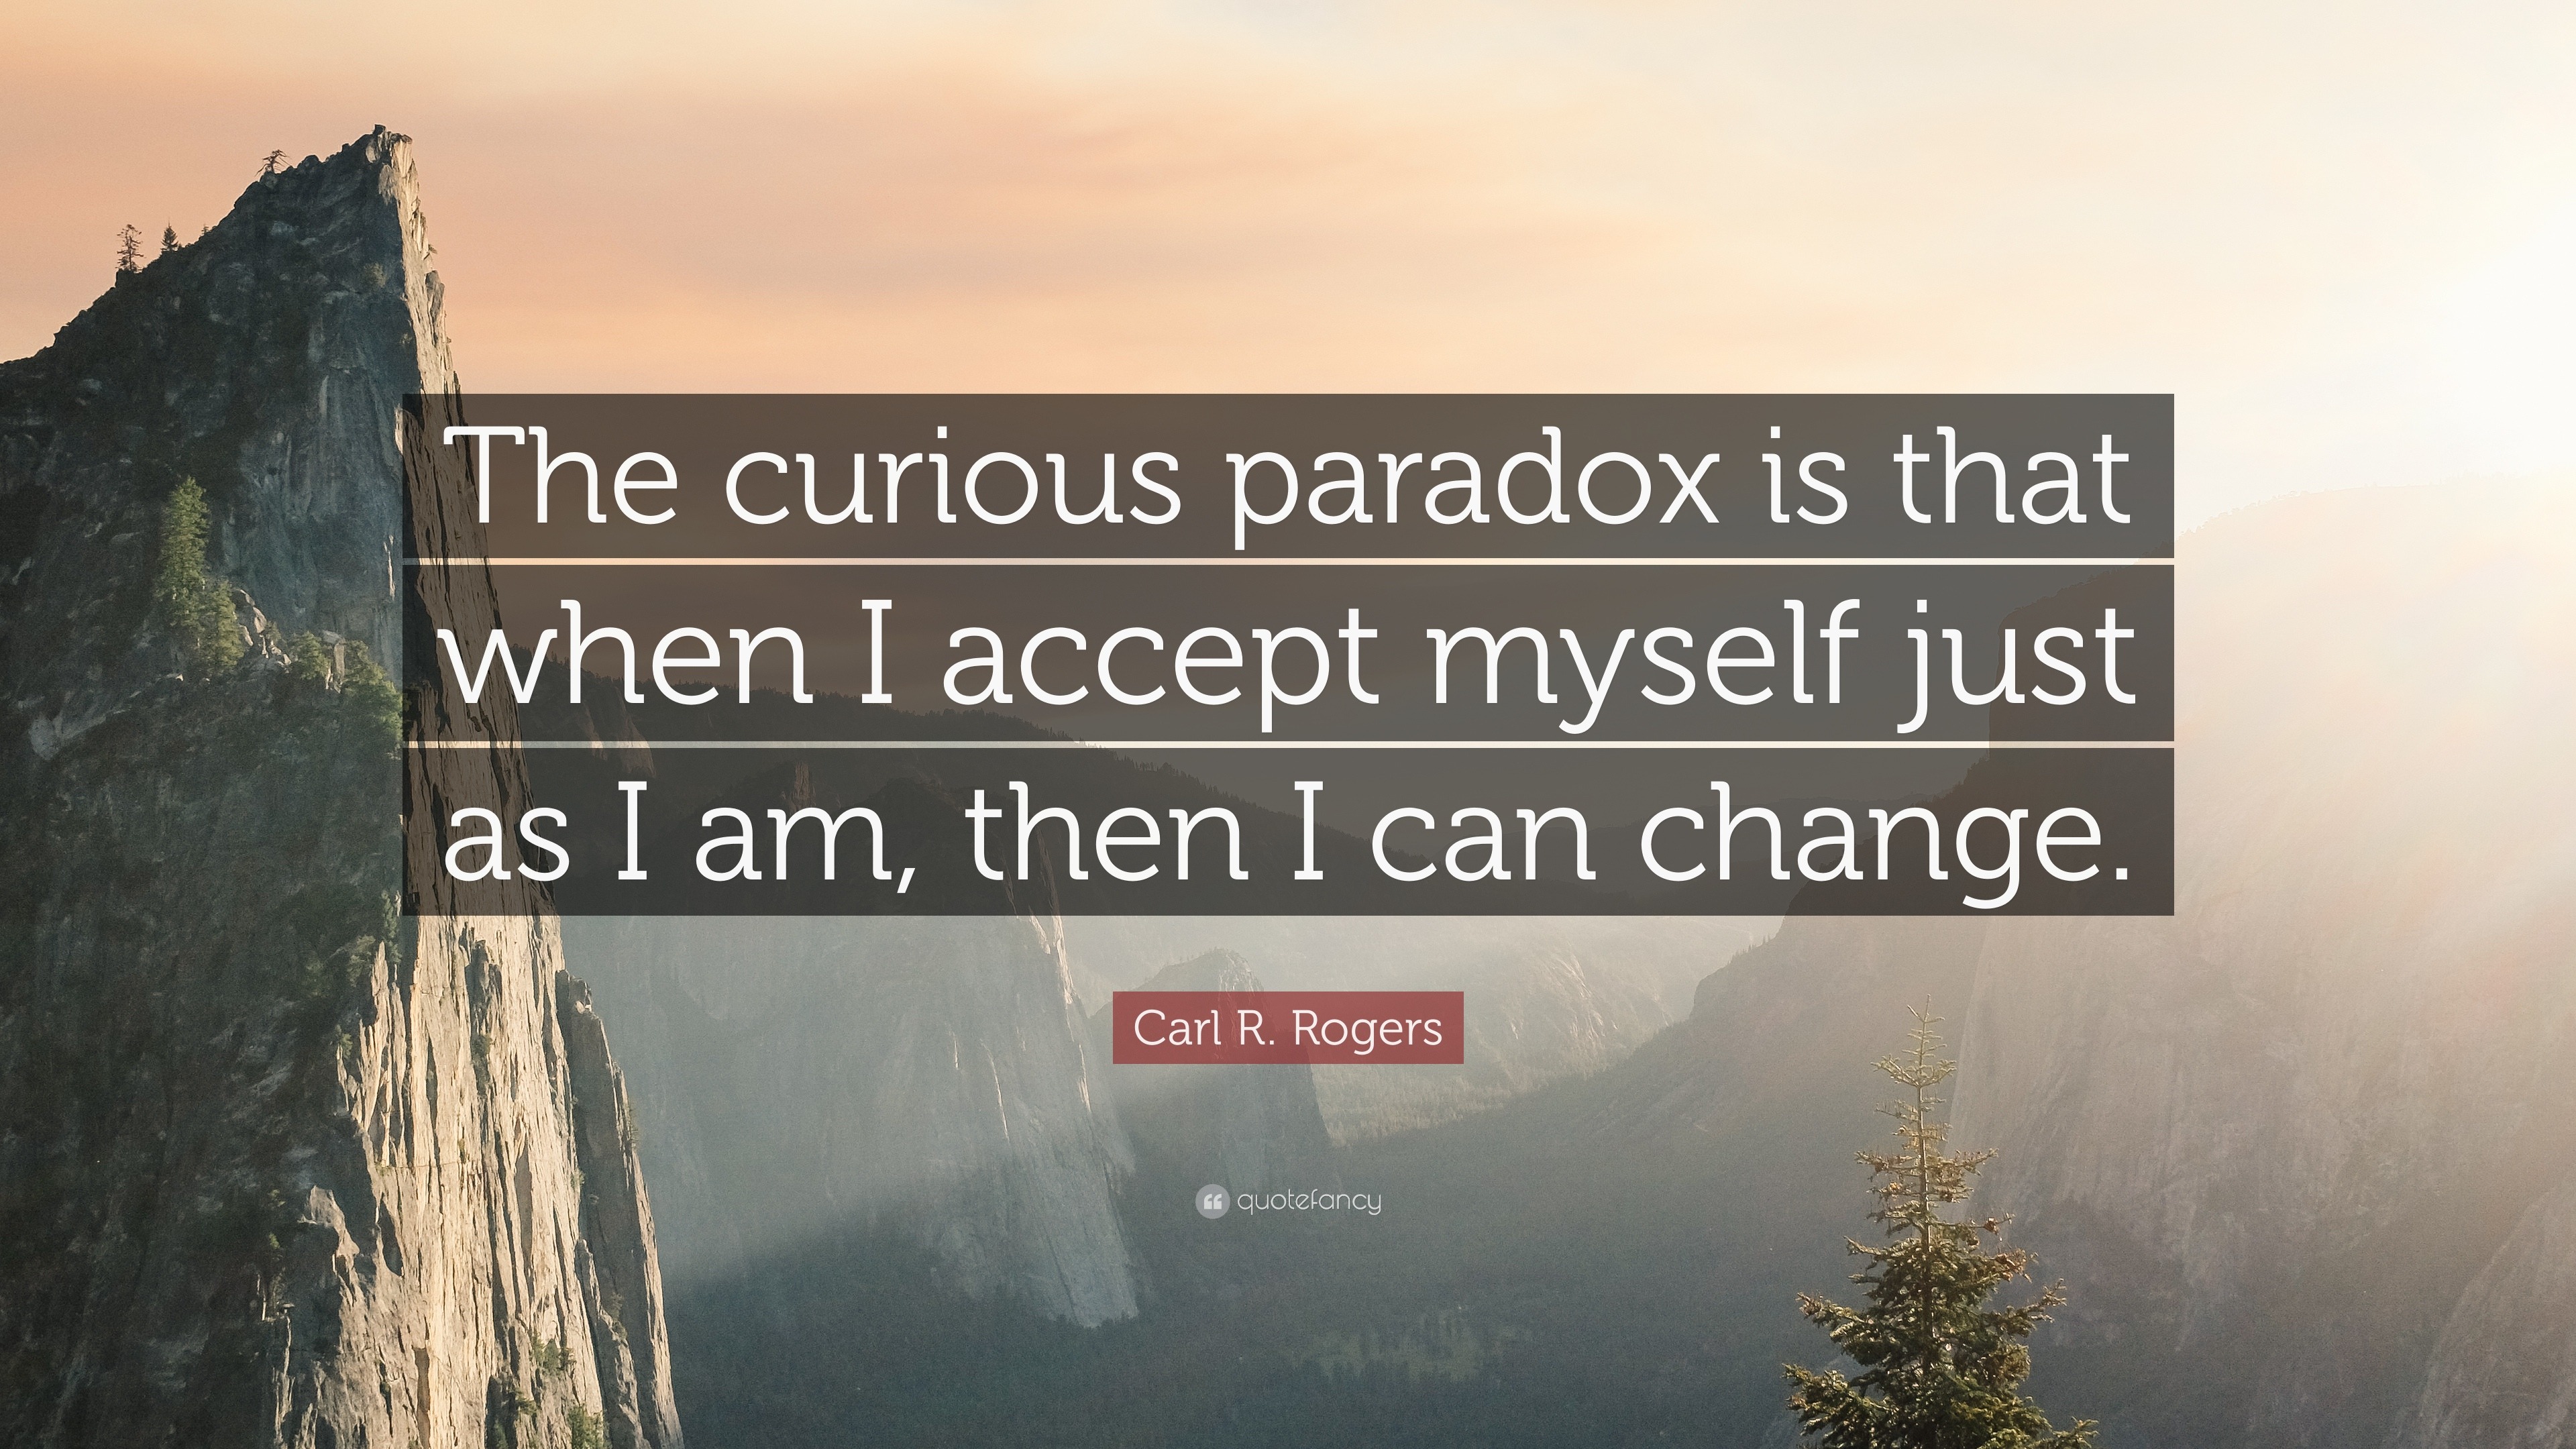 Carl R. Rogers Quote: “The curious paradox is that when I accept myself